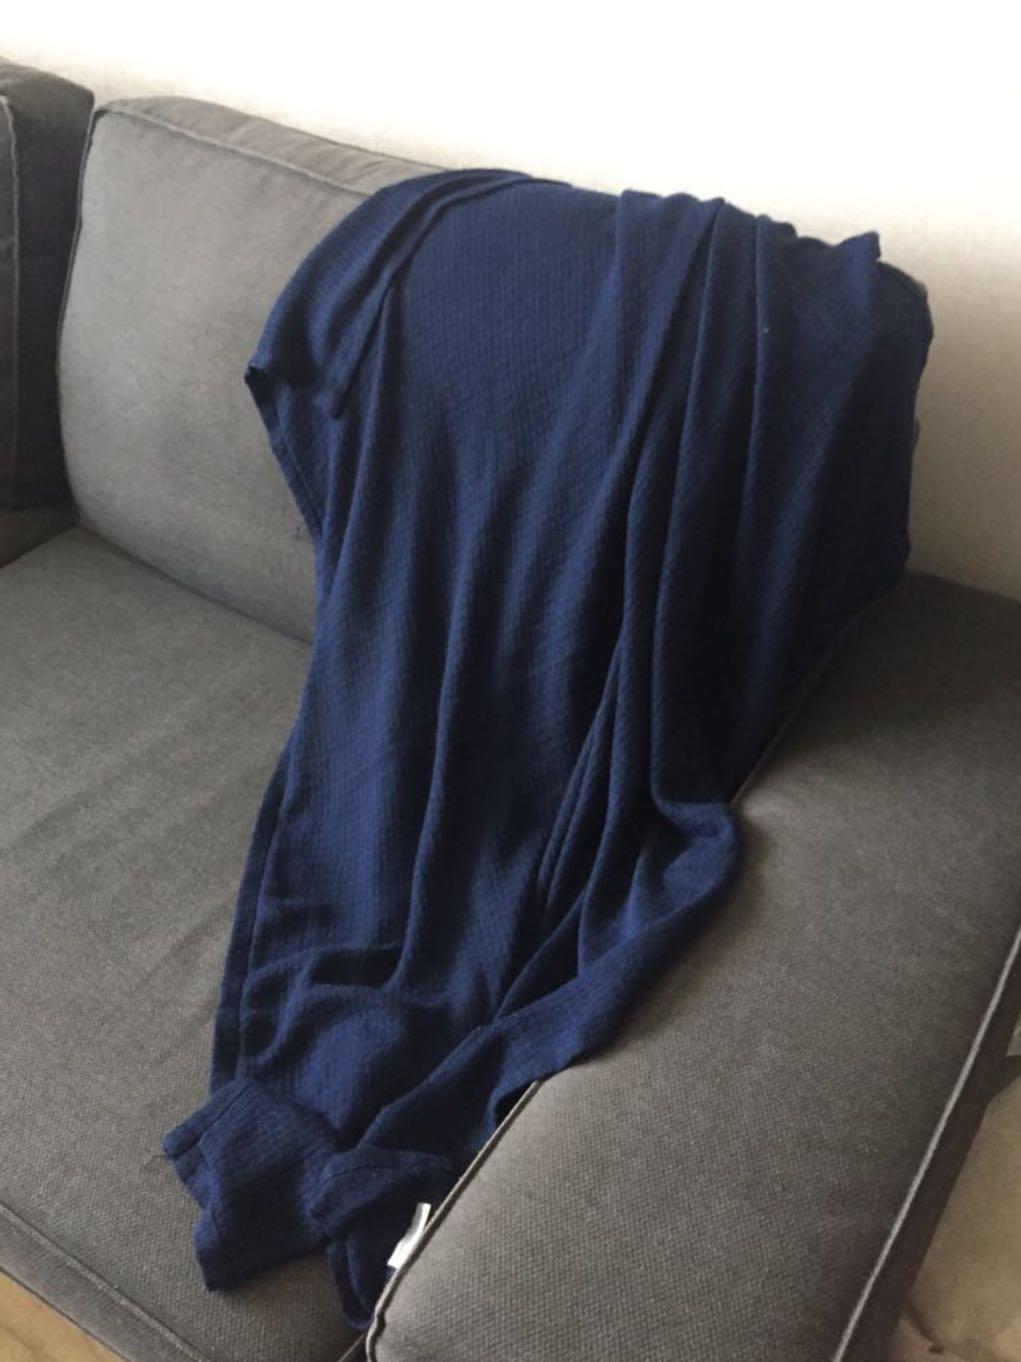 Cathay Pacific Navy Blue Throw Blanket